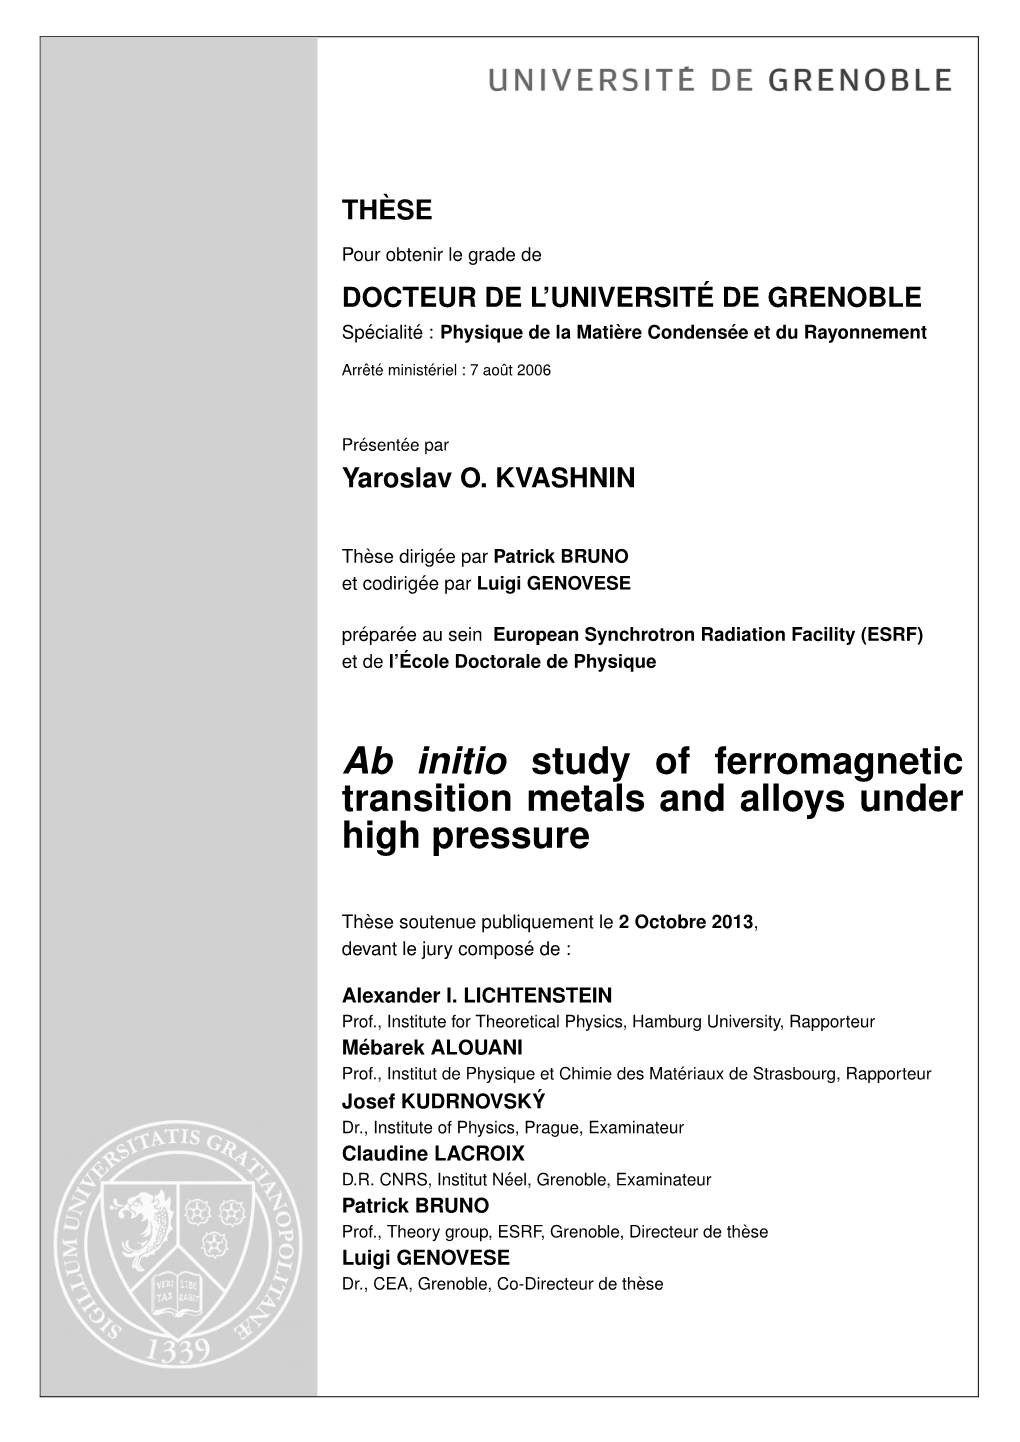 Ab Initio Study of Ferromagnetic Transition Metals and Alloys Under High Pressure